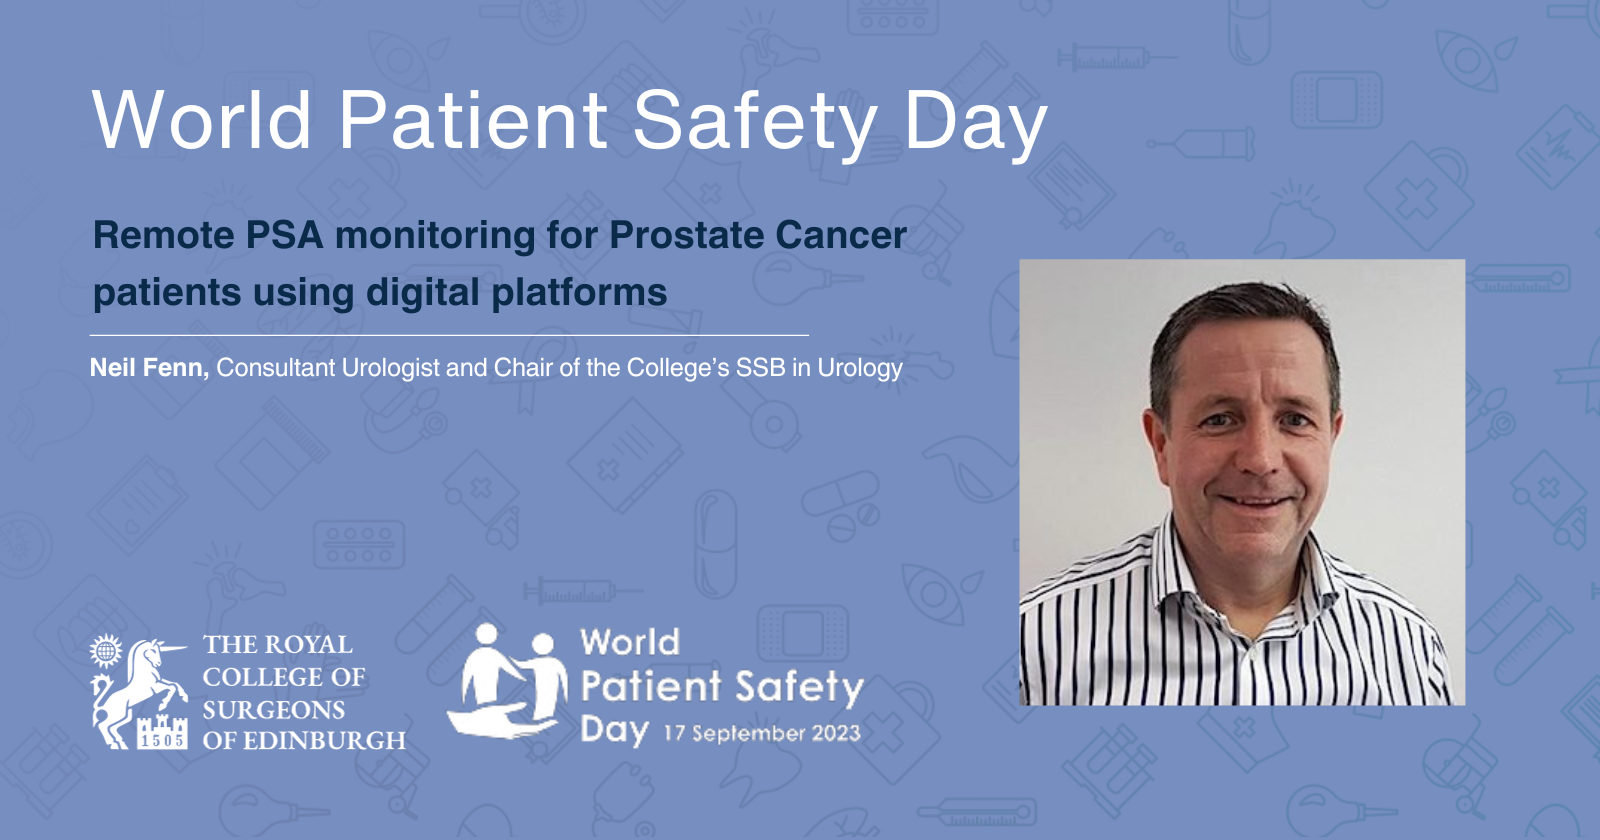 Remote PSA monitoring for Prostate Cancer patients using digital platforms – A safe and efficient follow up alternative to traditional ‘face to face’ outpatients.